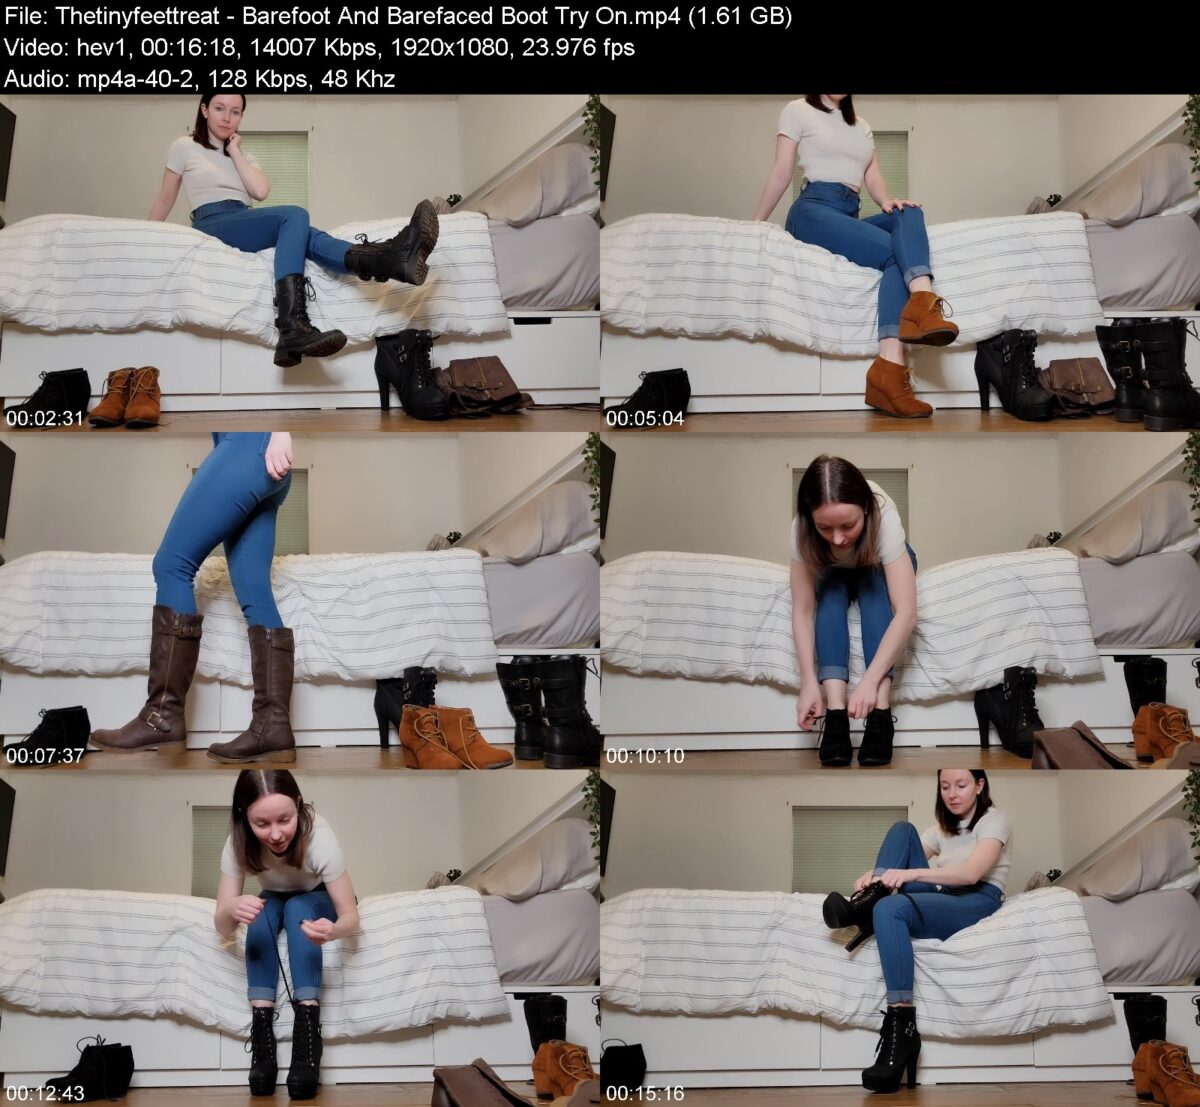 Thetinyfeettreat in Barefoot And Barefaced Boot Try On